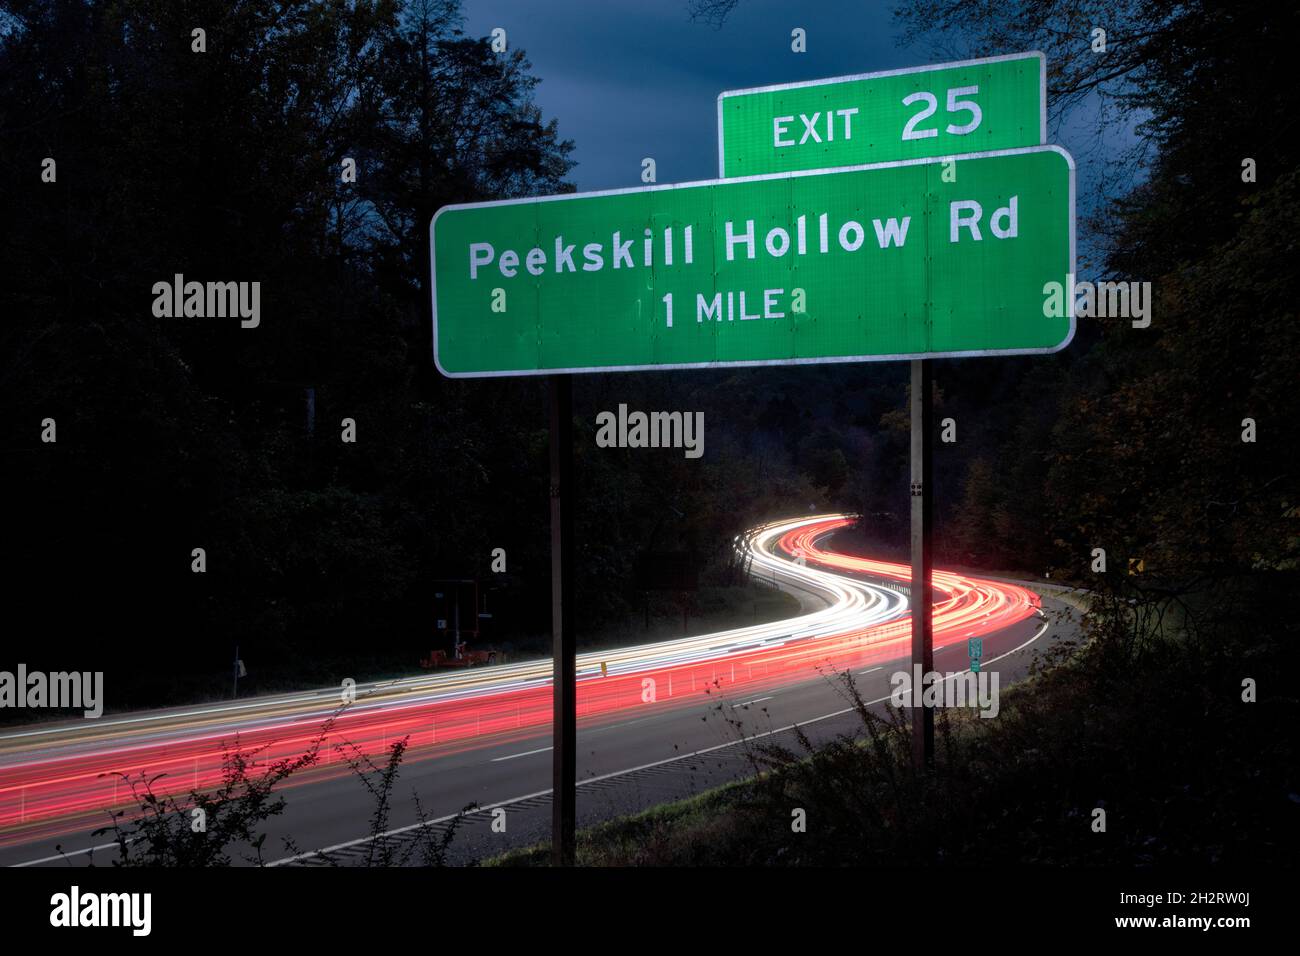 Rush Hour traffic blurred by a slow camera shutter speed on the Taconic State Parkway in Putnam County, New York. Peekskill Hollow Road exit sign. Stock Photo